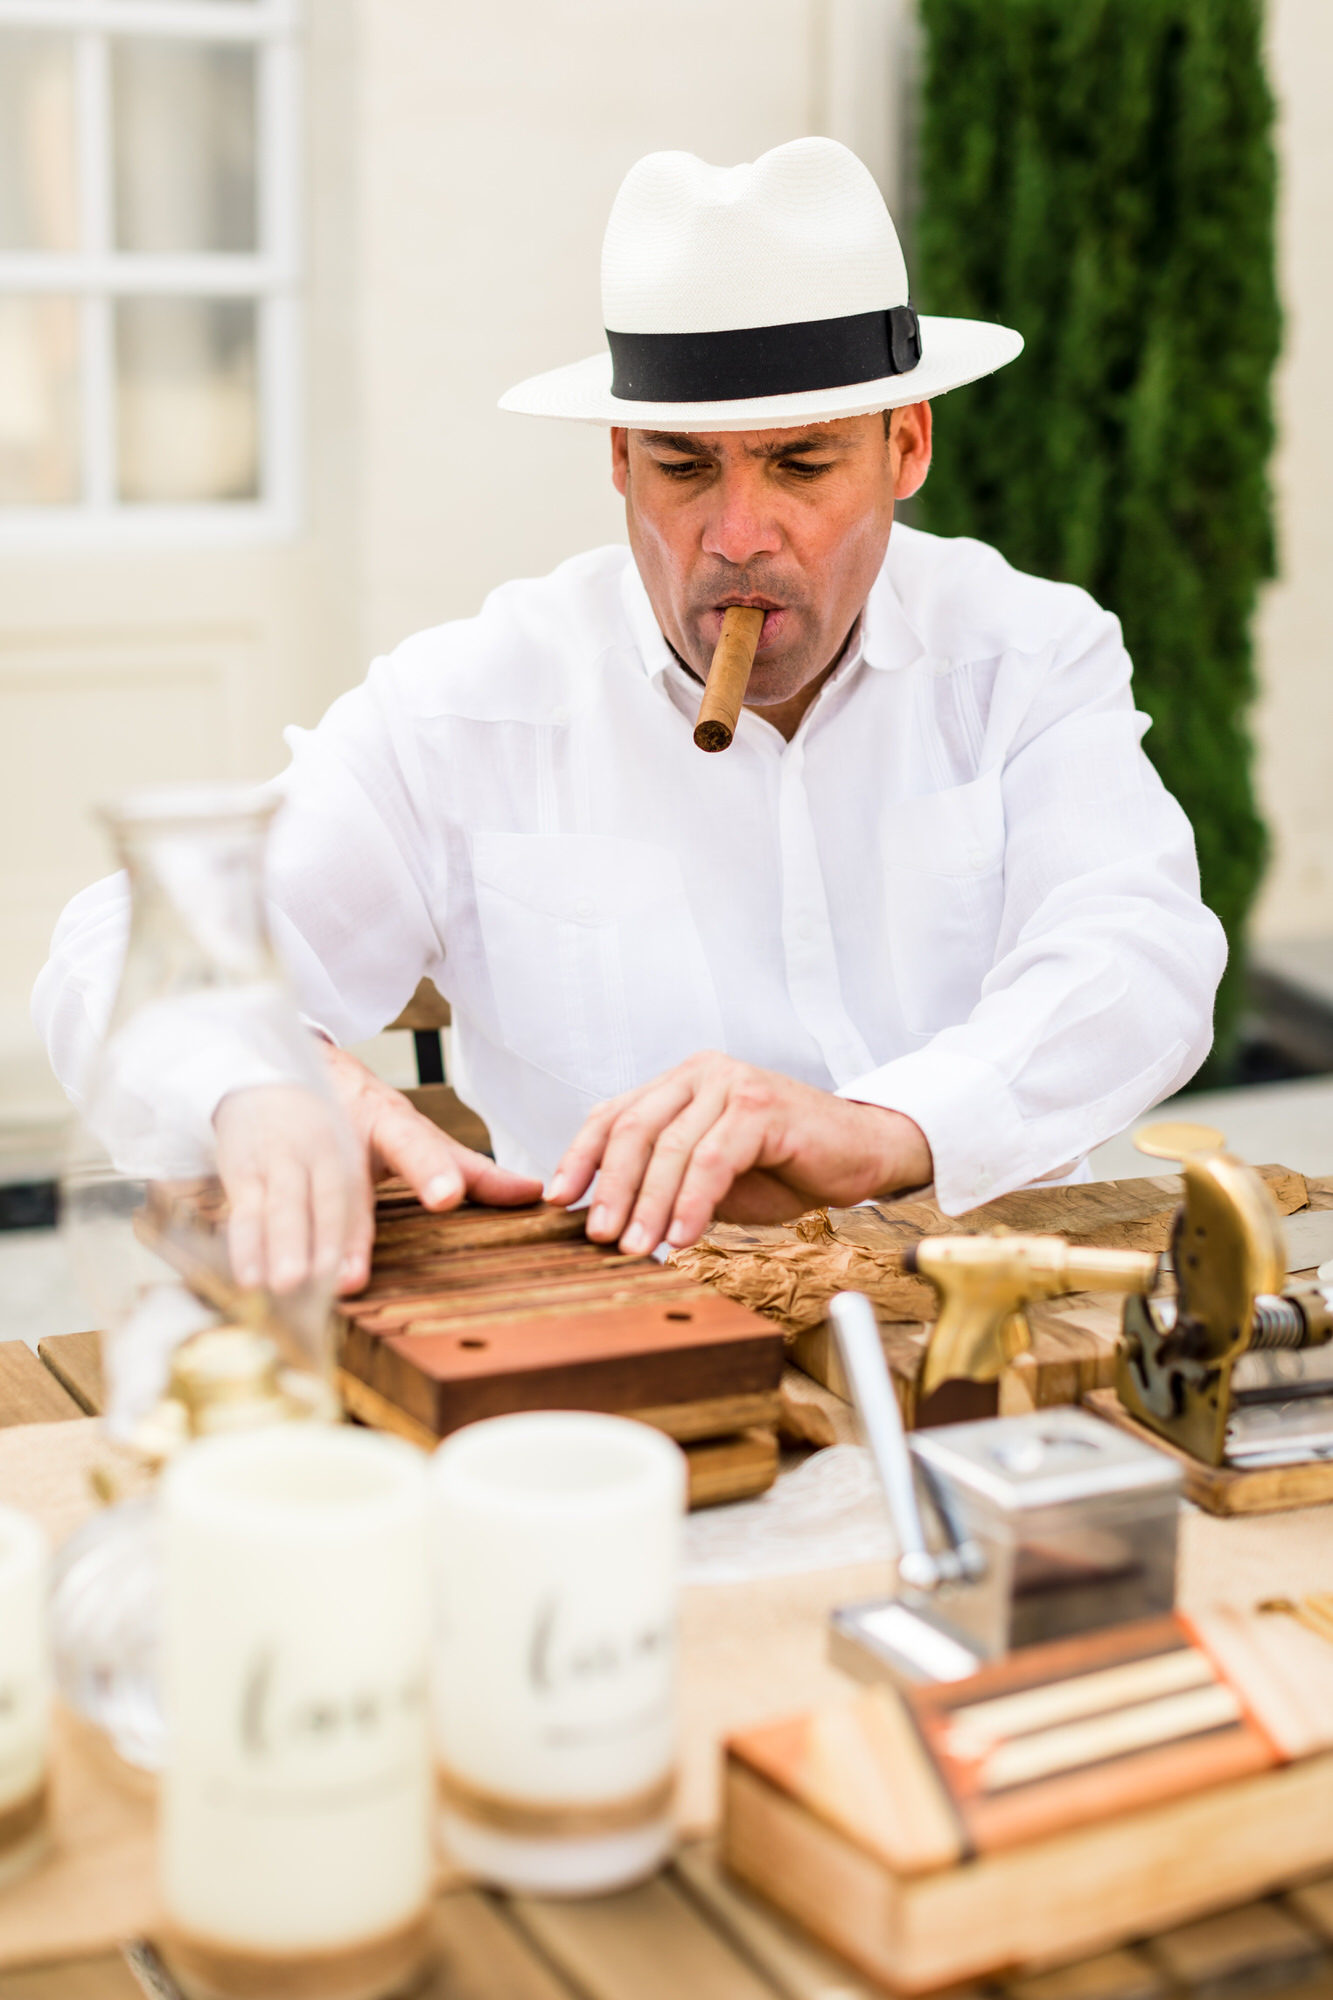 cigars being rolled in traditional manner at cuban inspired wedding